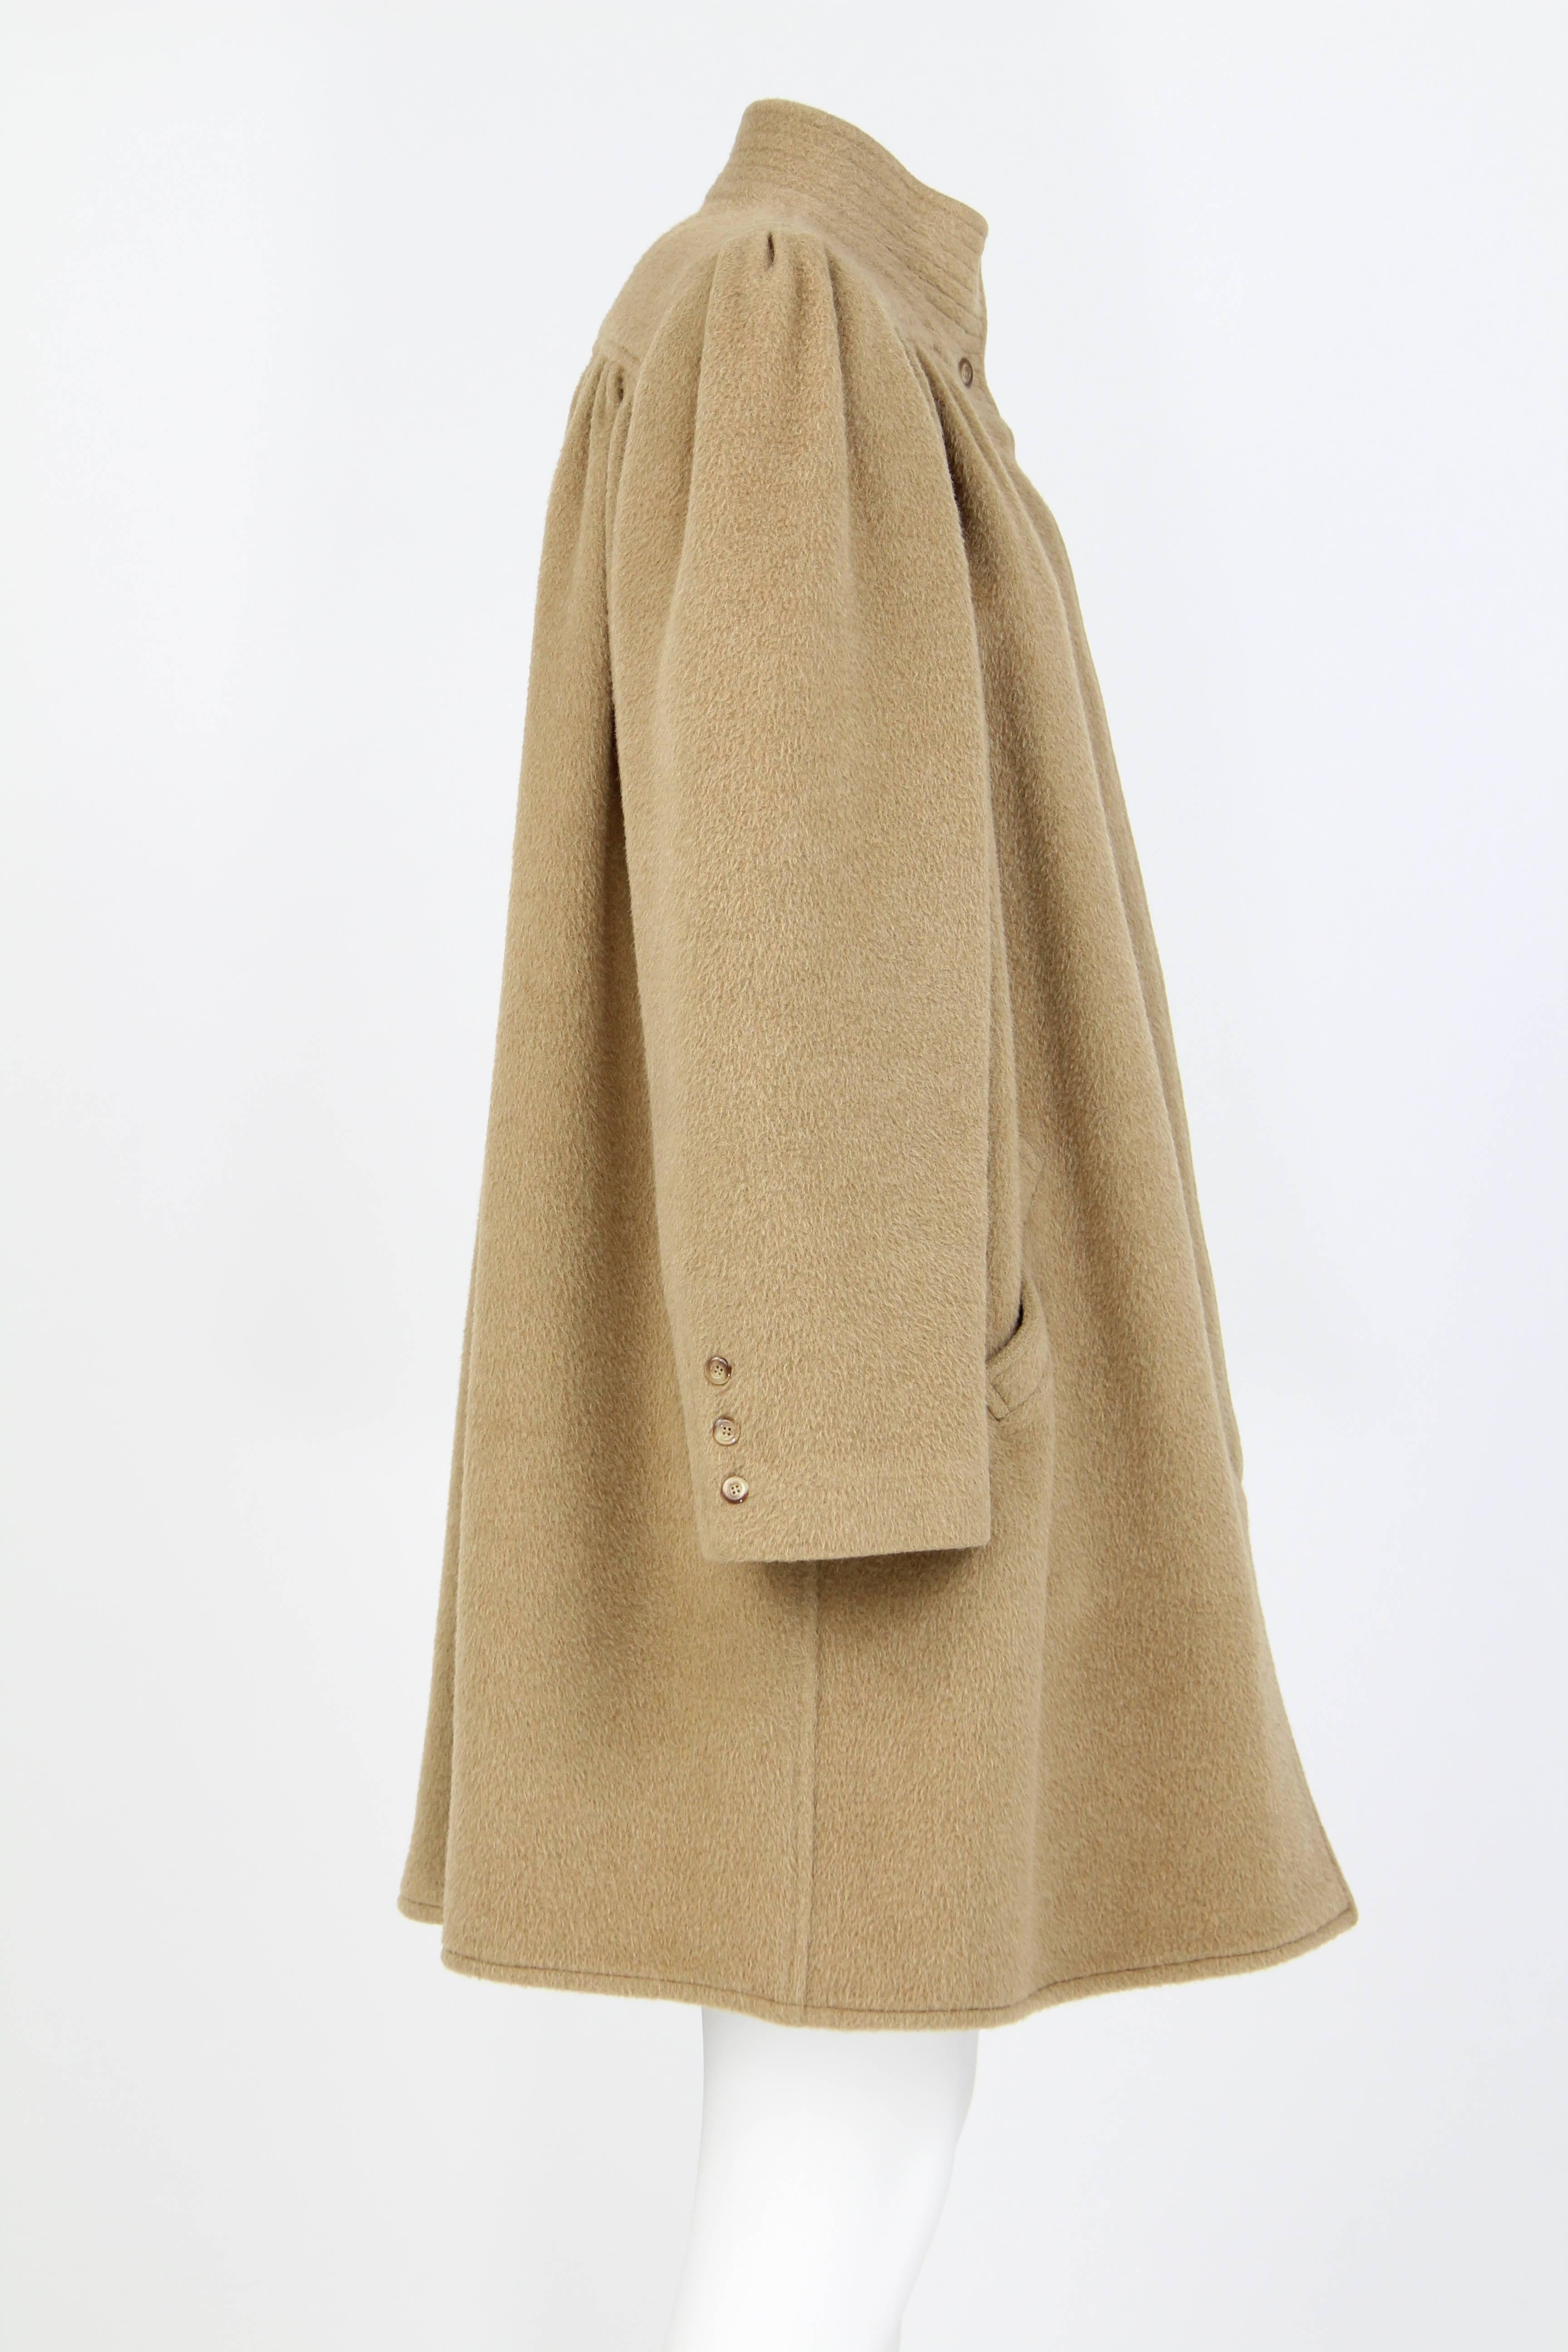 Valentino beige wool Coat featuring a high collar, hidden front buttons and two pockets. No lining.
The size shown on the label is size IT 42 with an oversize style, typical of the 1980s period.
The item is in good conditions.
The measure of the